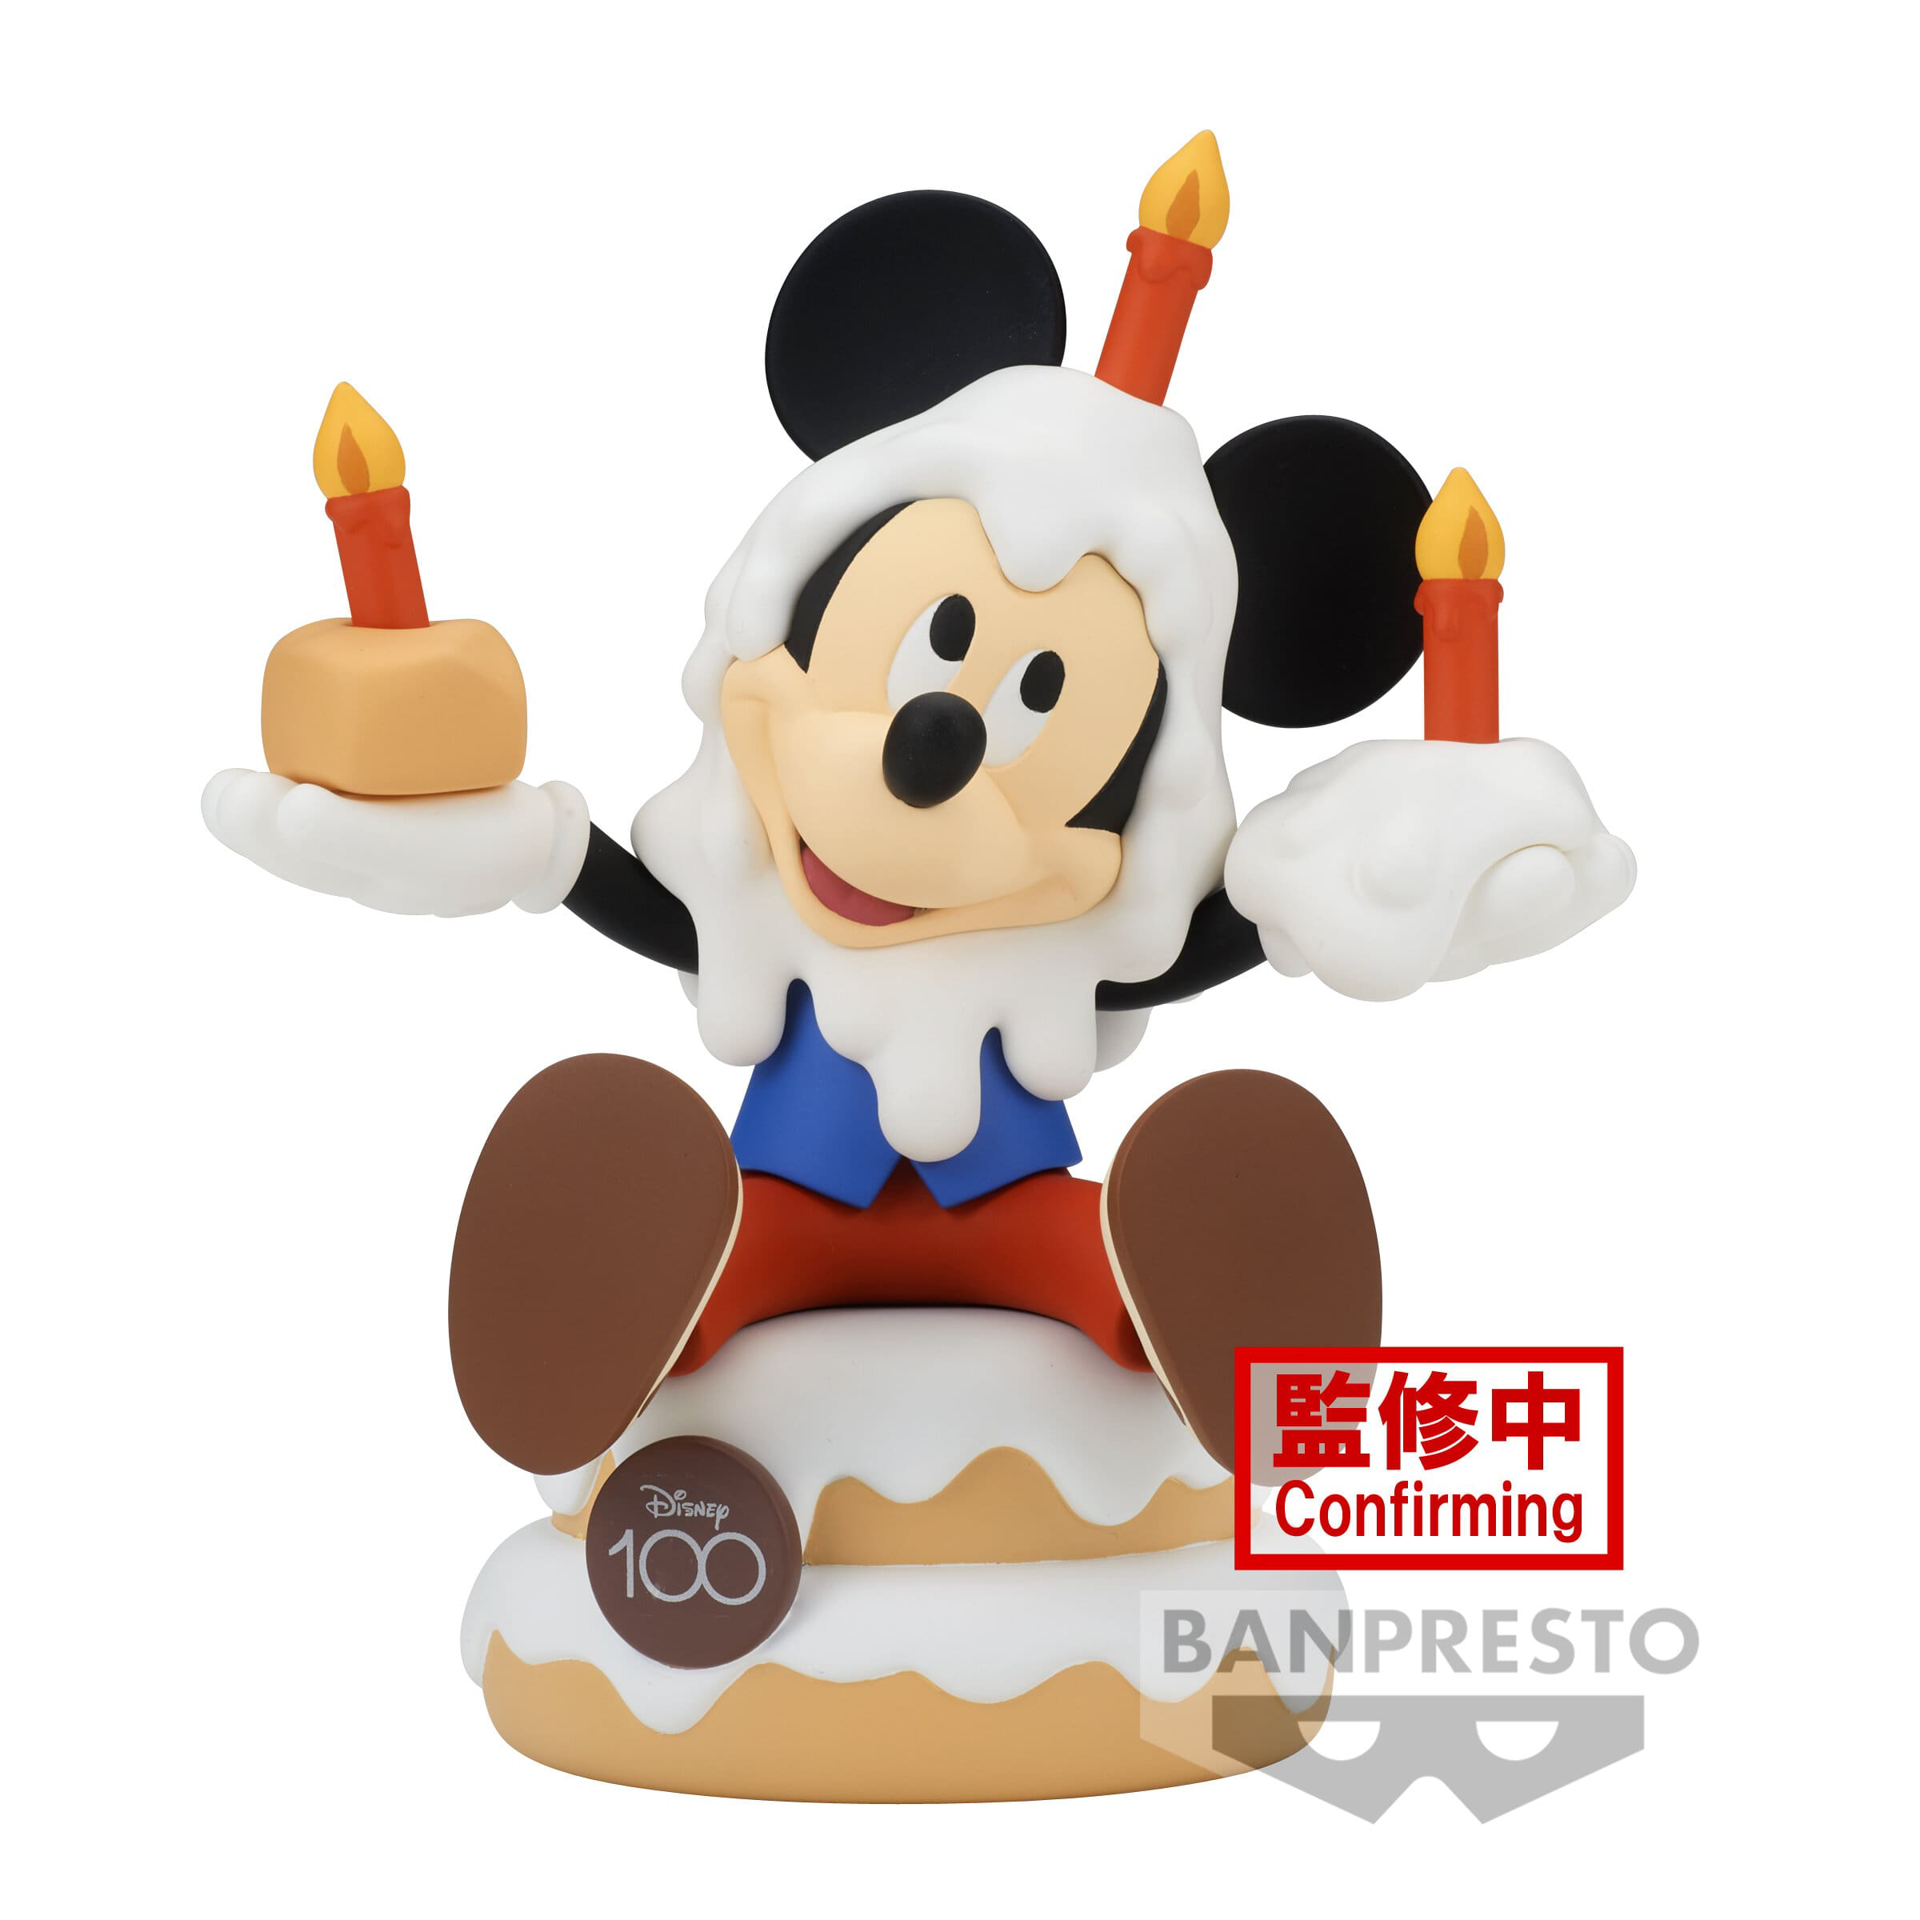 Disney Characters Sofubi - Disney 100th Anniversary Ver. - Mickey Mouse Statue 11cm